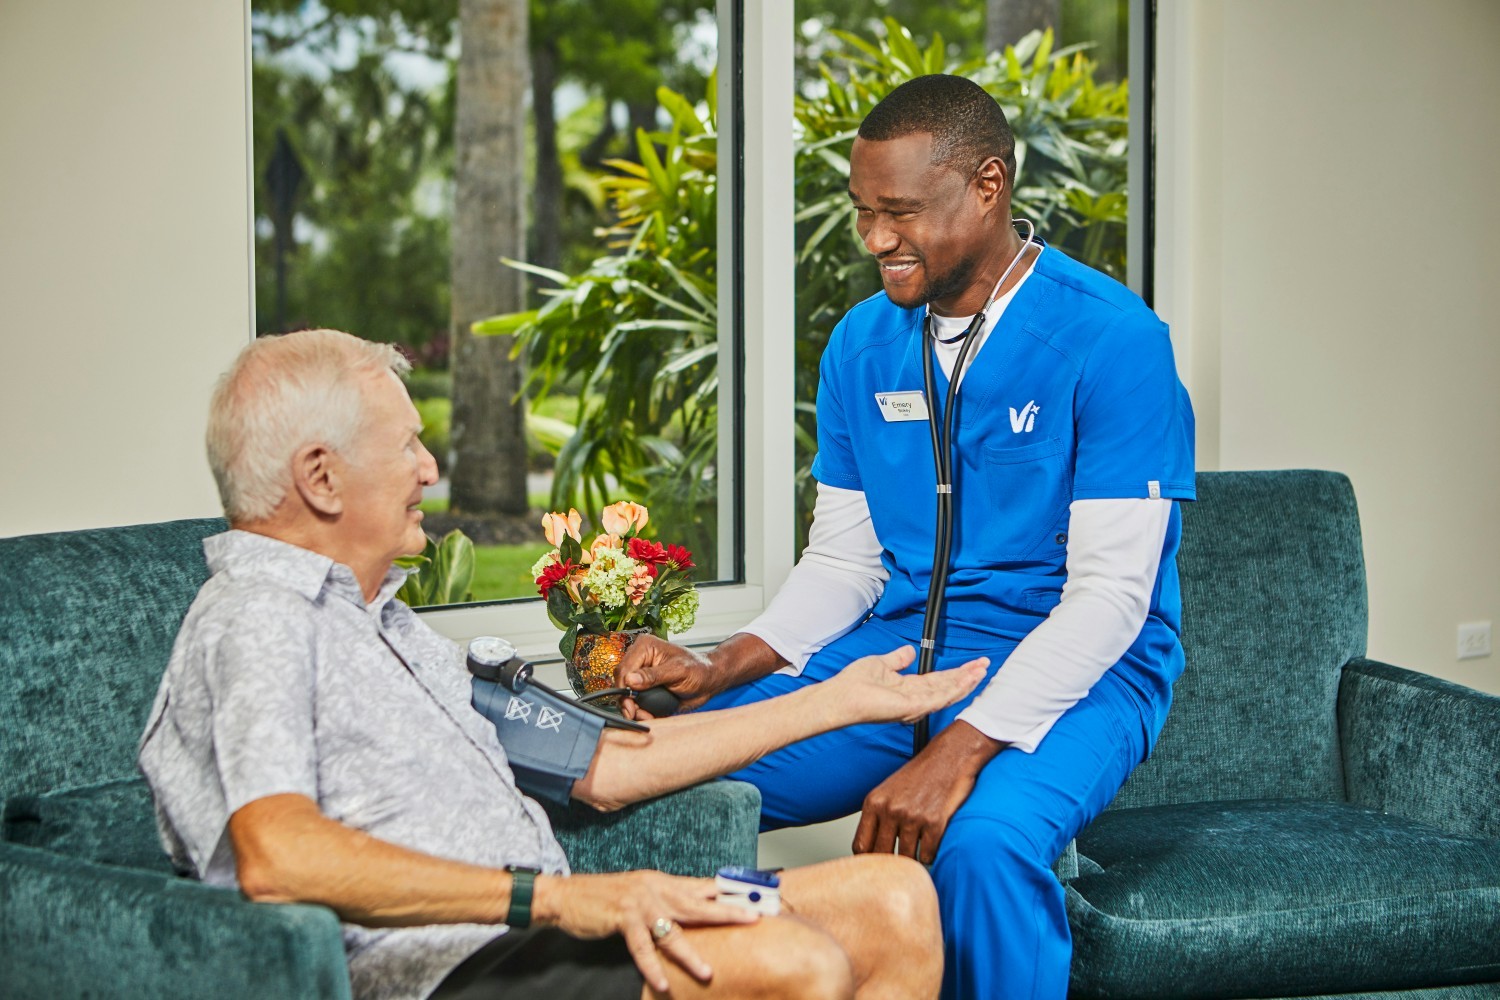 Vi's Care teams build relationships with residents and access certified nursing career ladders to advance their careers.